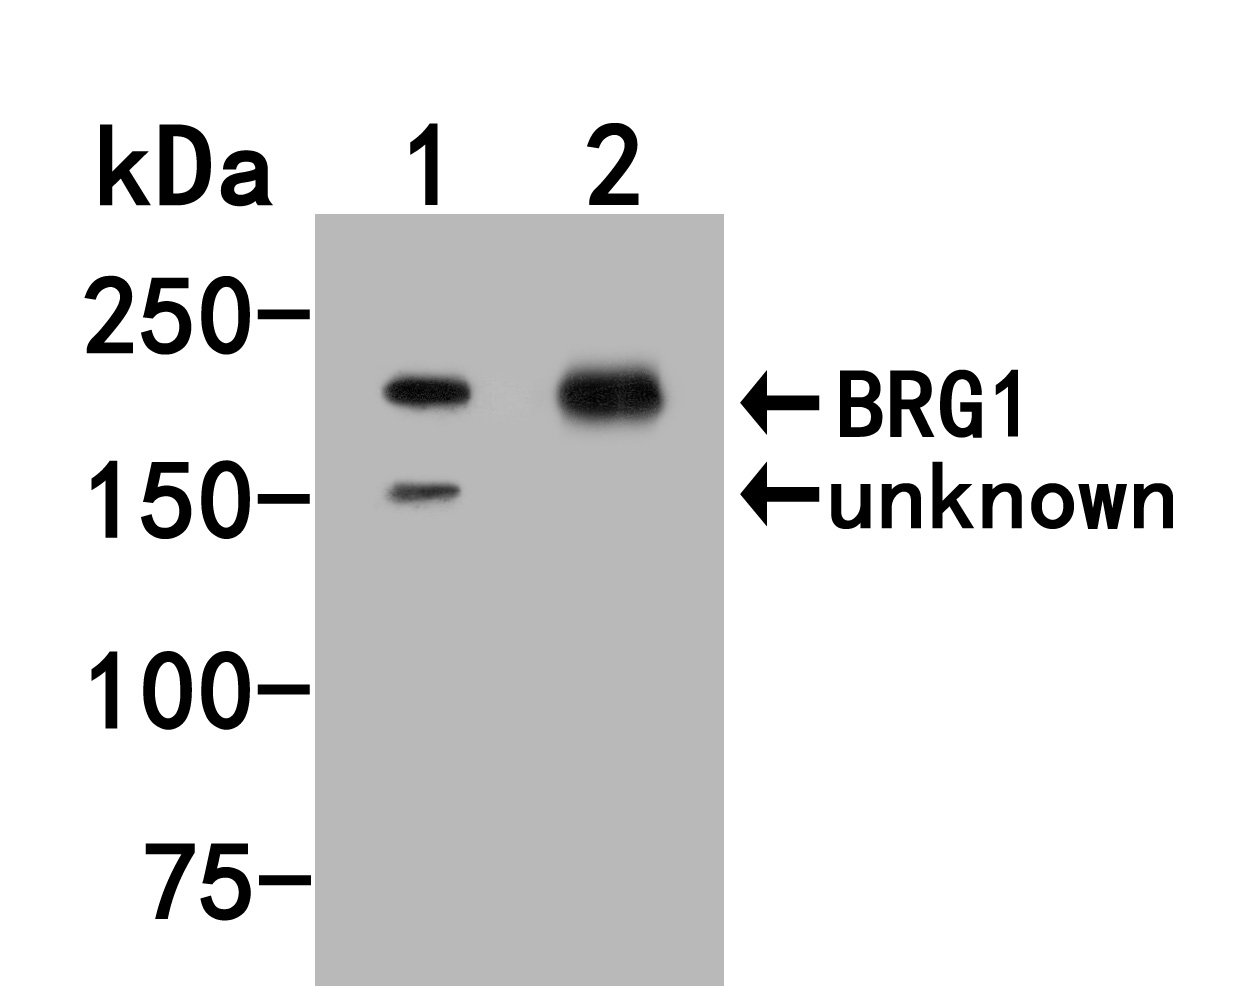 Western blot analysis of BRG1 on different lysates. Proteins were transferred to a PVDF membrane and blocked with 5% NFDM/TBST for 1 hour at room temperature. The primary antibody (HA500262, 1/1,000) was used in 5% NFDM/TBST at room temperature for 2 hours. Goat Anti-Rabbit IgG - HRP Secondary Antibody (HA1001) at 1:200,000 dilution was used for 1 hour at room temperature.<br />
Positive control: <br />
Lane 1: 293 cell lysate<br />
Lane 2: Daudi cell lysate